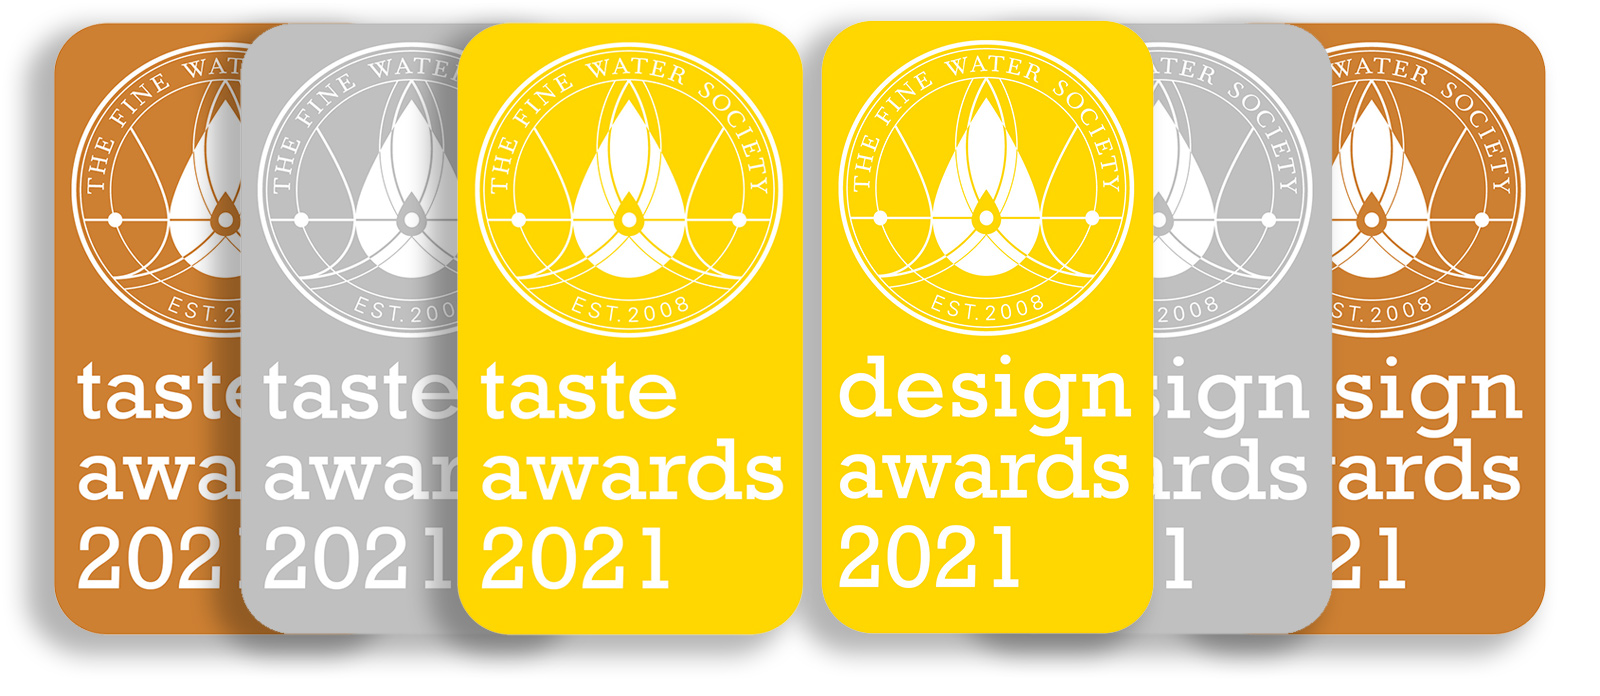 Thunderbird Spirit Water is honored and proud to win the Gold Award for Taste in the Still Super Low Category at FineWaters TASTE & DESIGN AWARDS 2021 in Bled, Slovenia